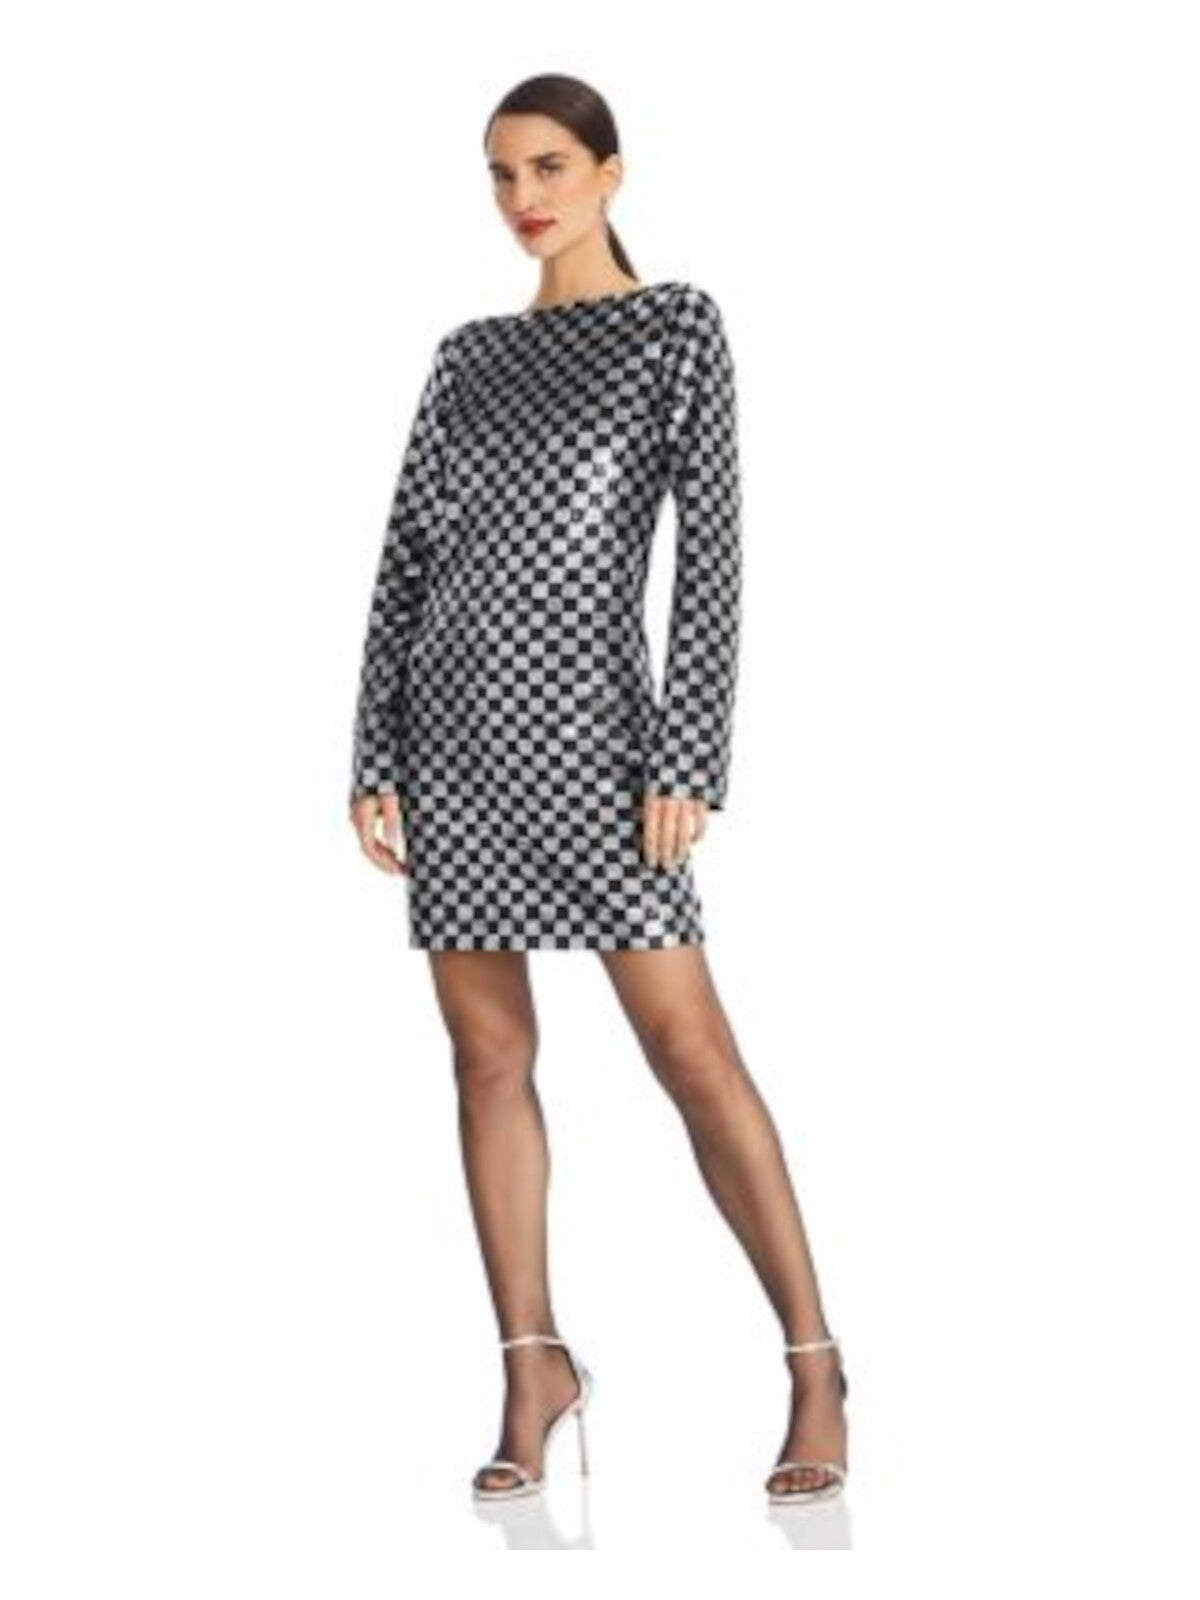 MICHAEL KORS Womens Black Sequined Zippered Lined Check Long Sleeve Boat Neck Above The Knee Cocktail Sheath Dress 8